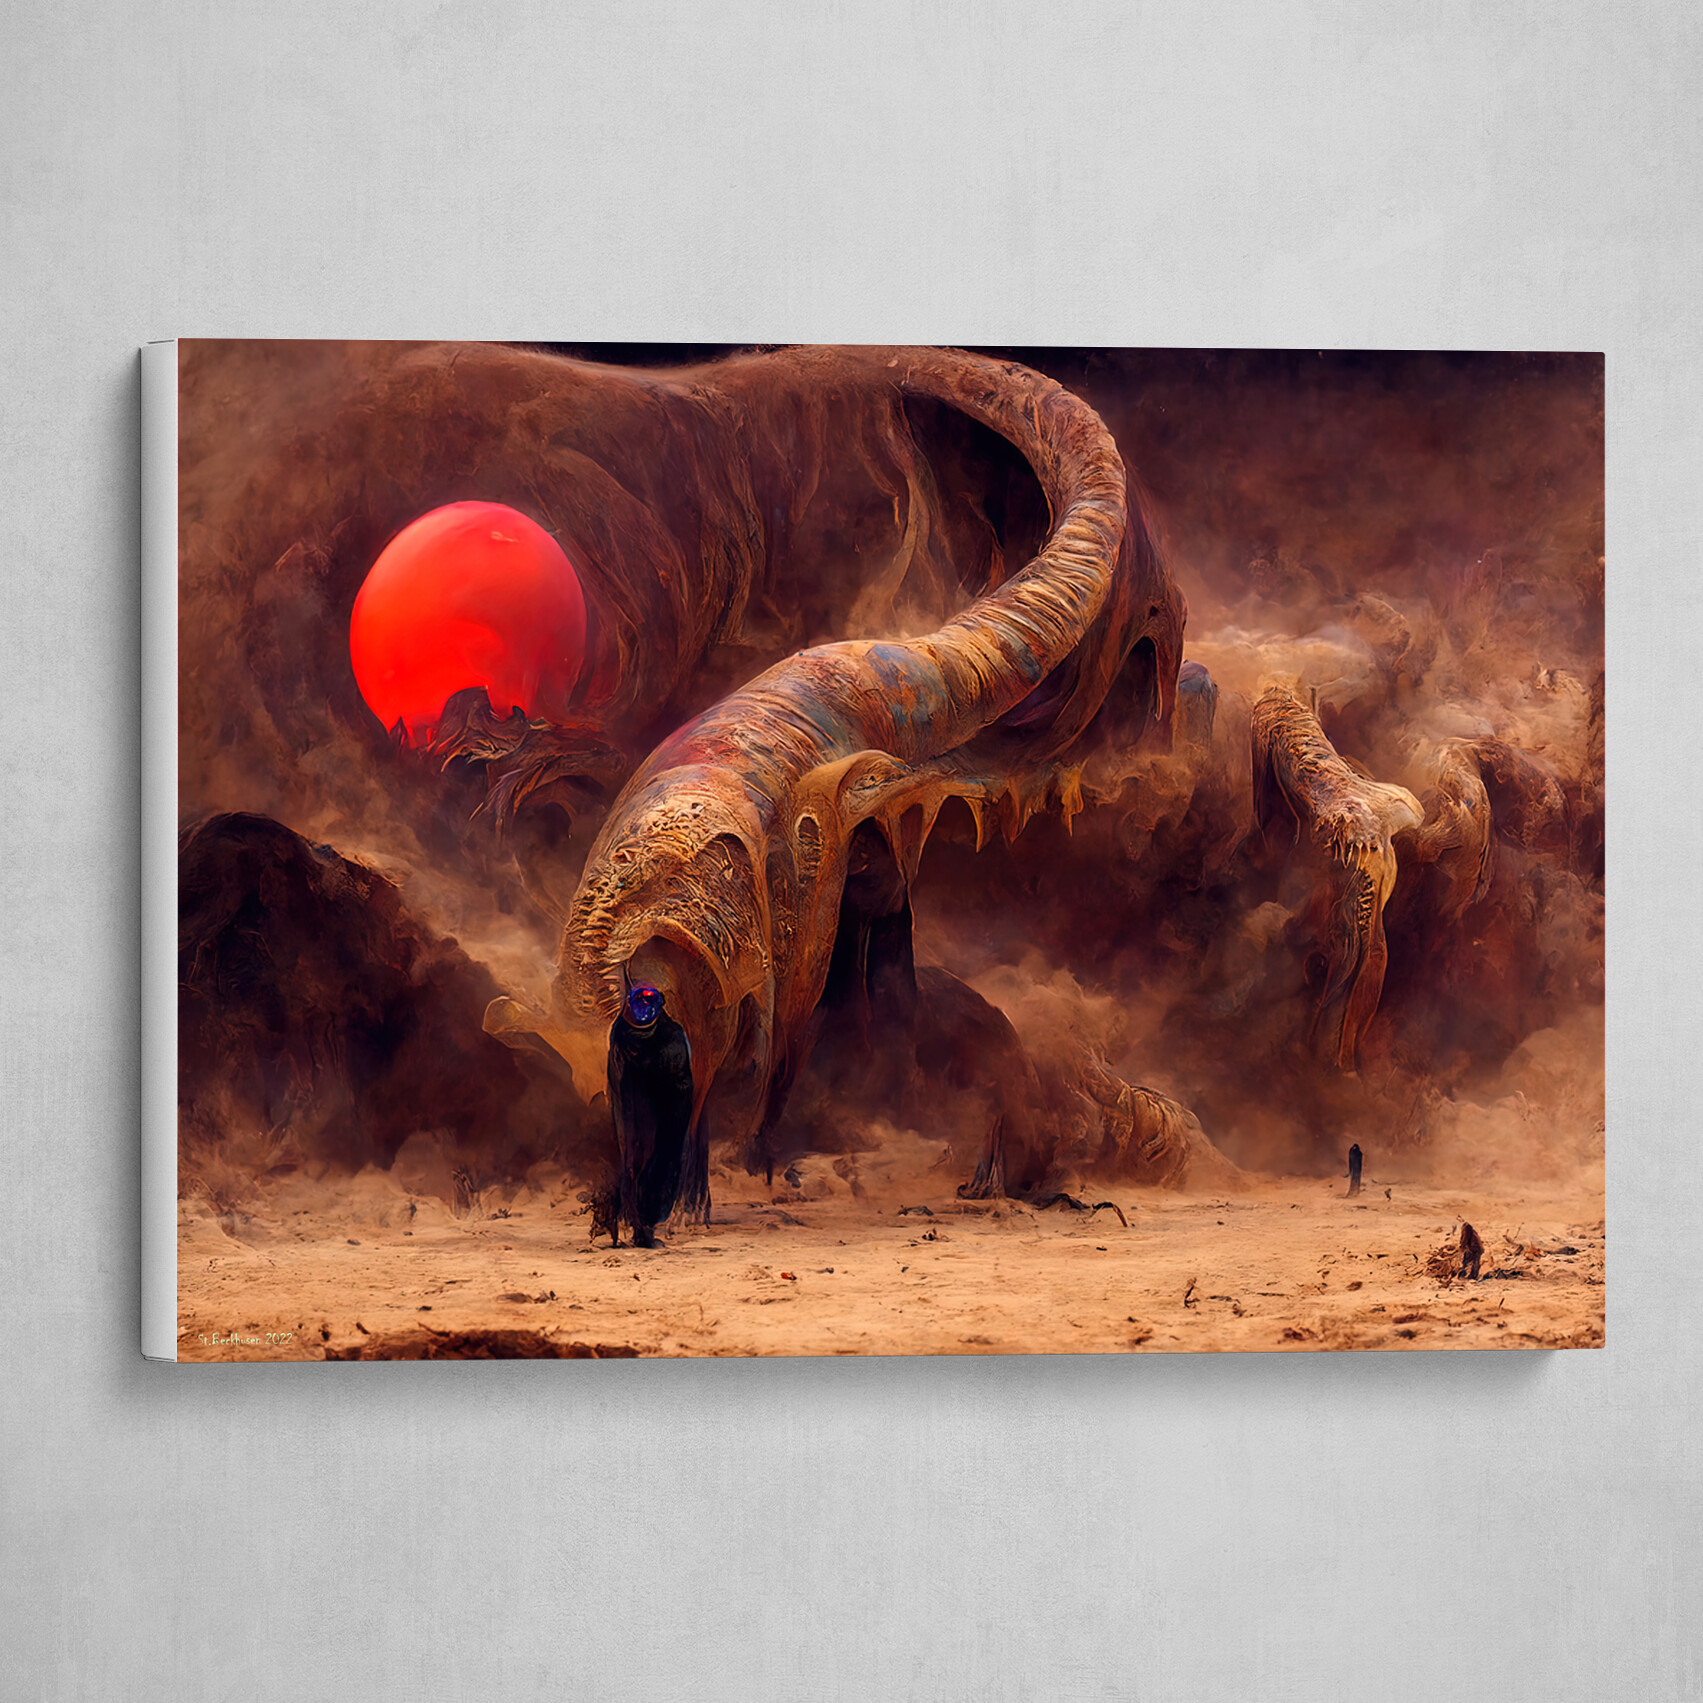 The Prehistoric Dune - Sandworm Entities and their Masters 3.4